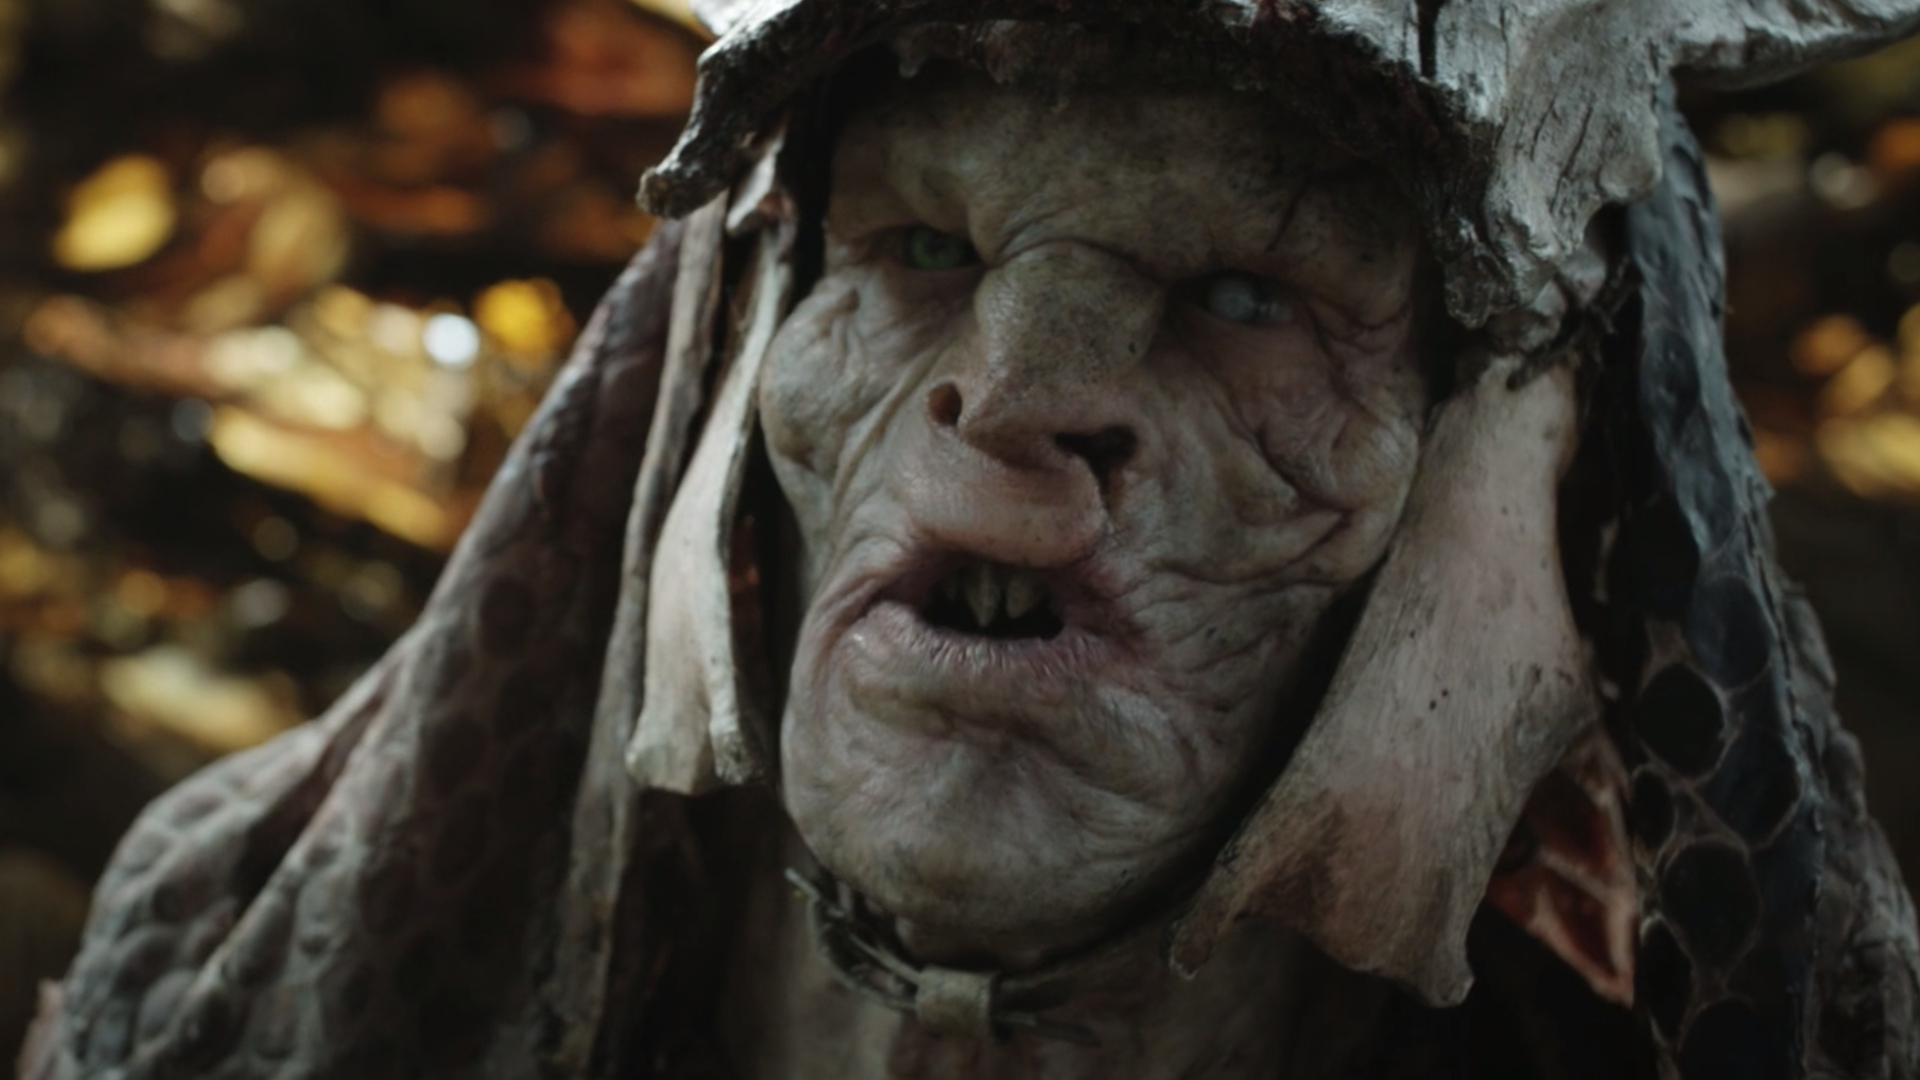 One of the orcs of Middle Earth